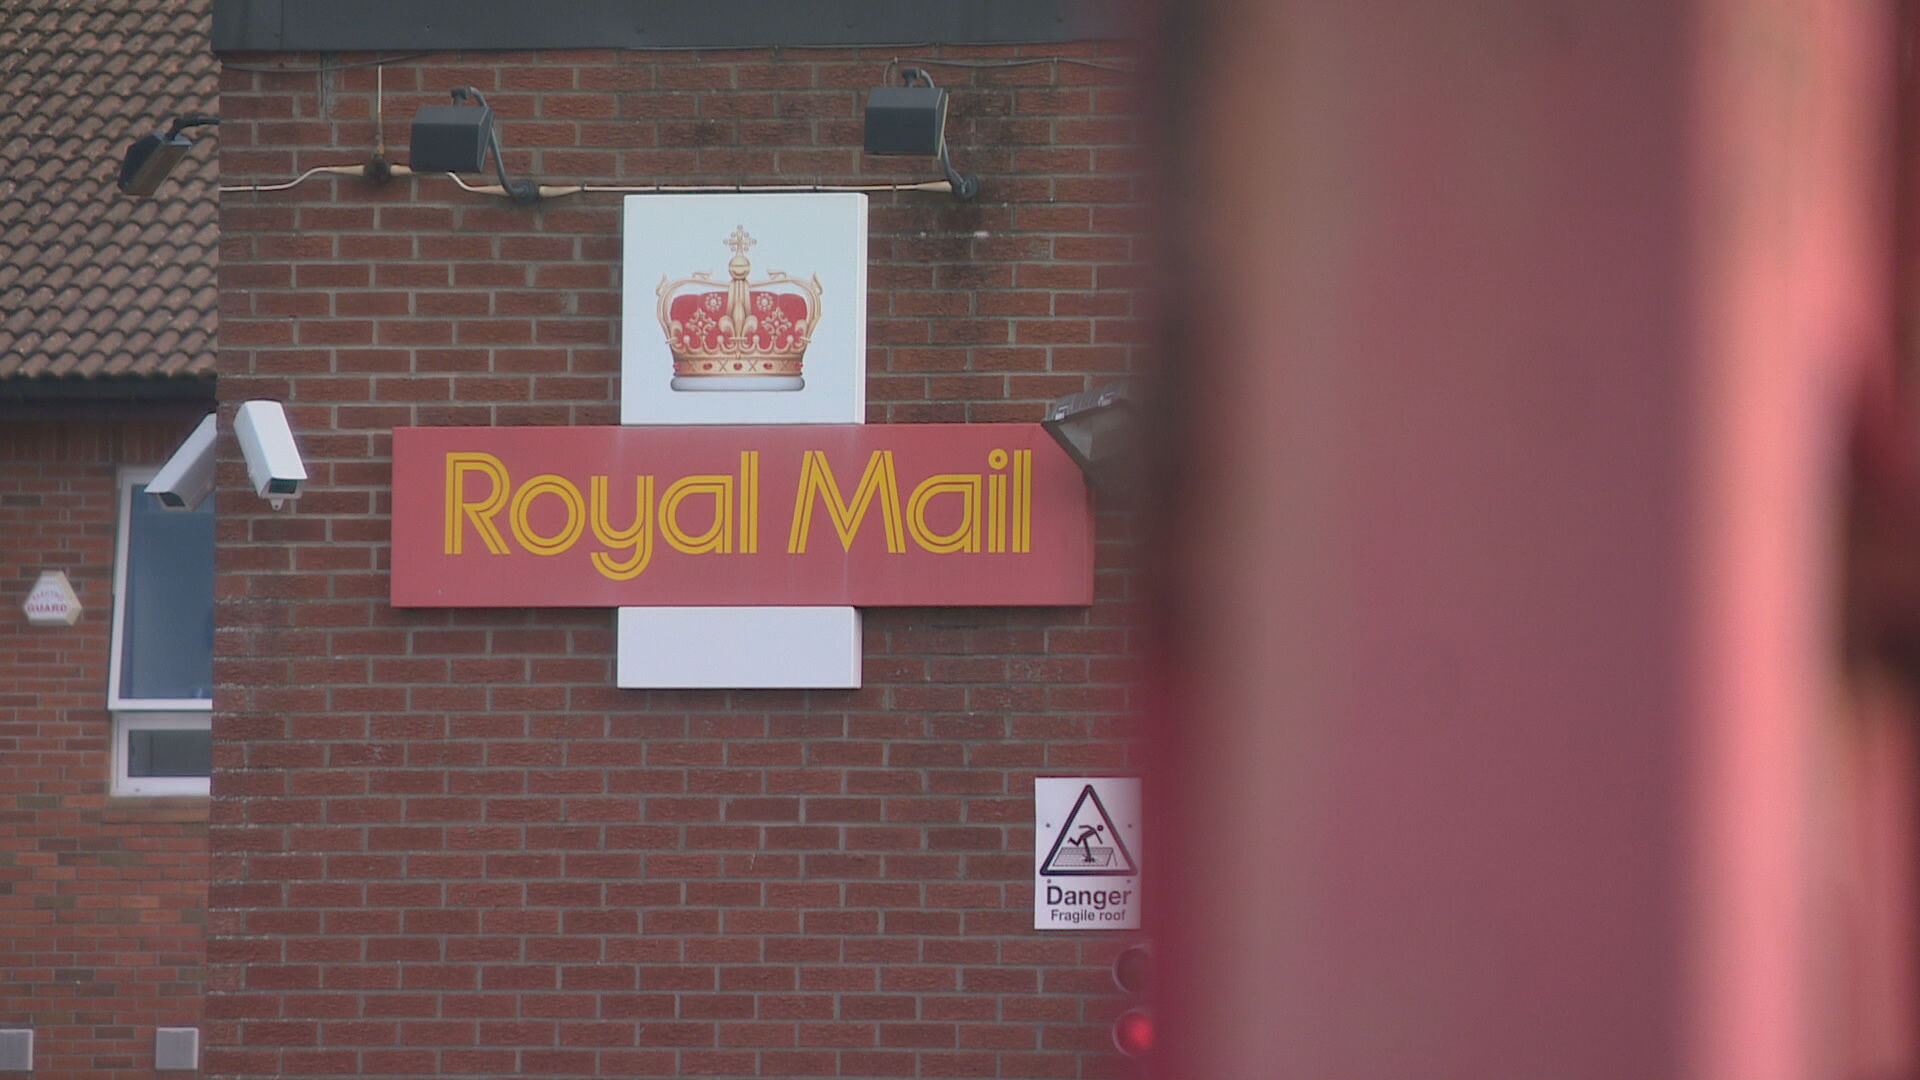 The MPs called on the postal services regulator, Ofcom, to open an enforcement investigation into Royal Mail’s USO delivery